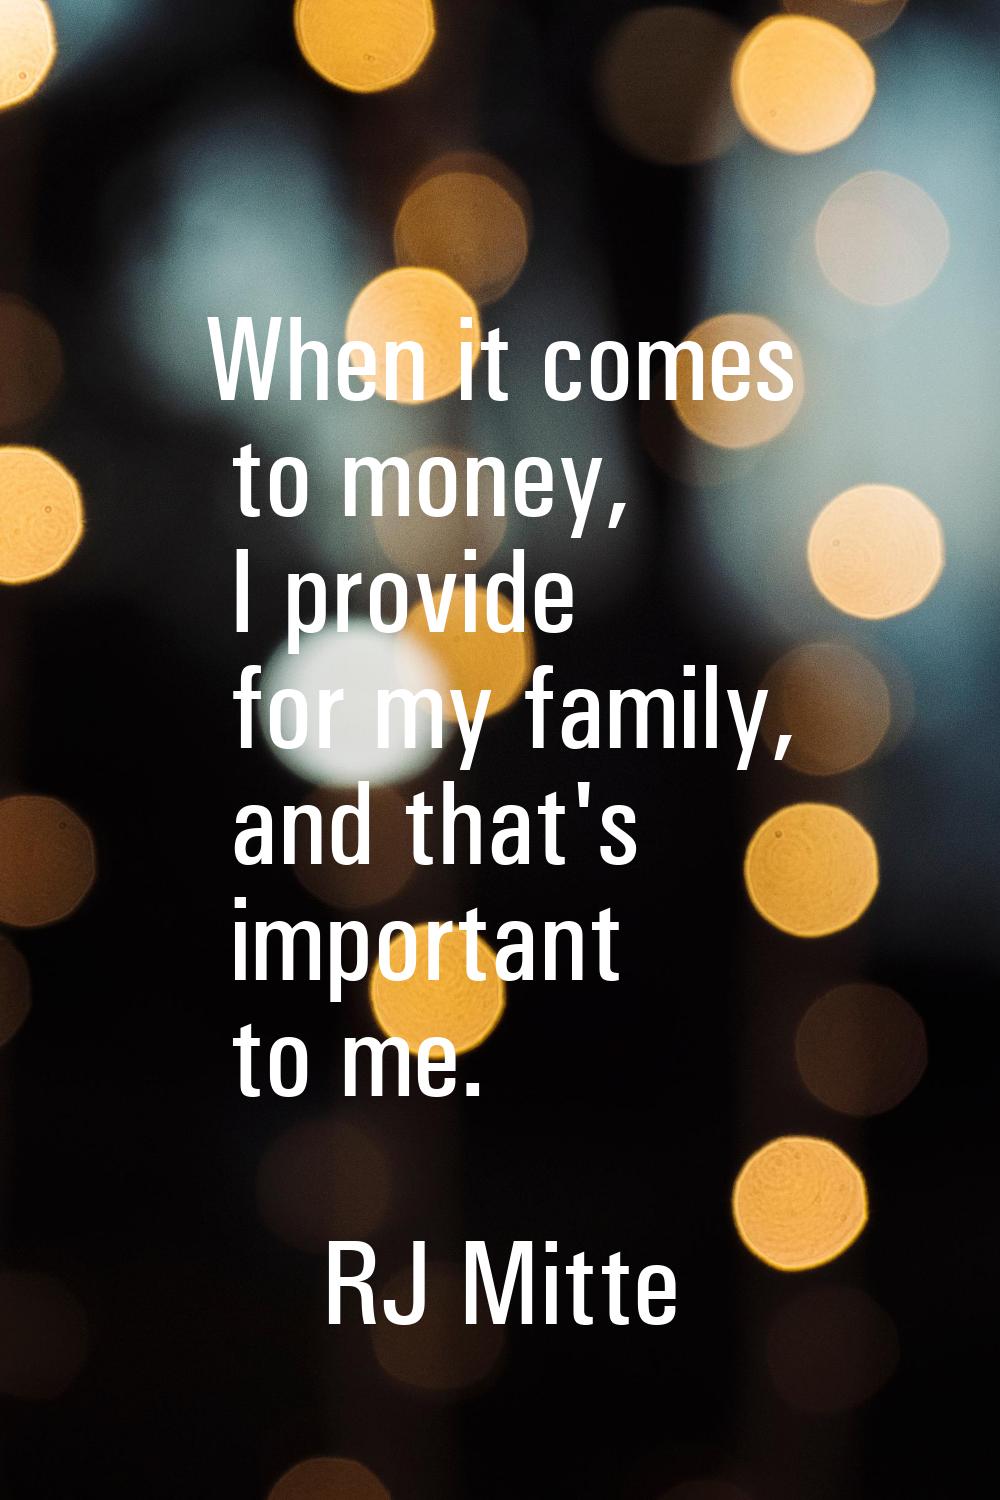 When it comes to money, I provide for my family, and that's important to me.